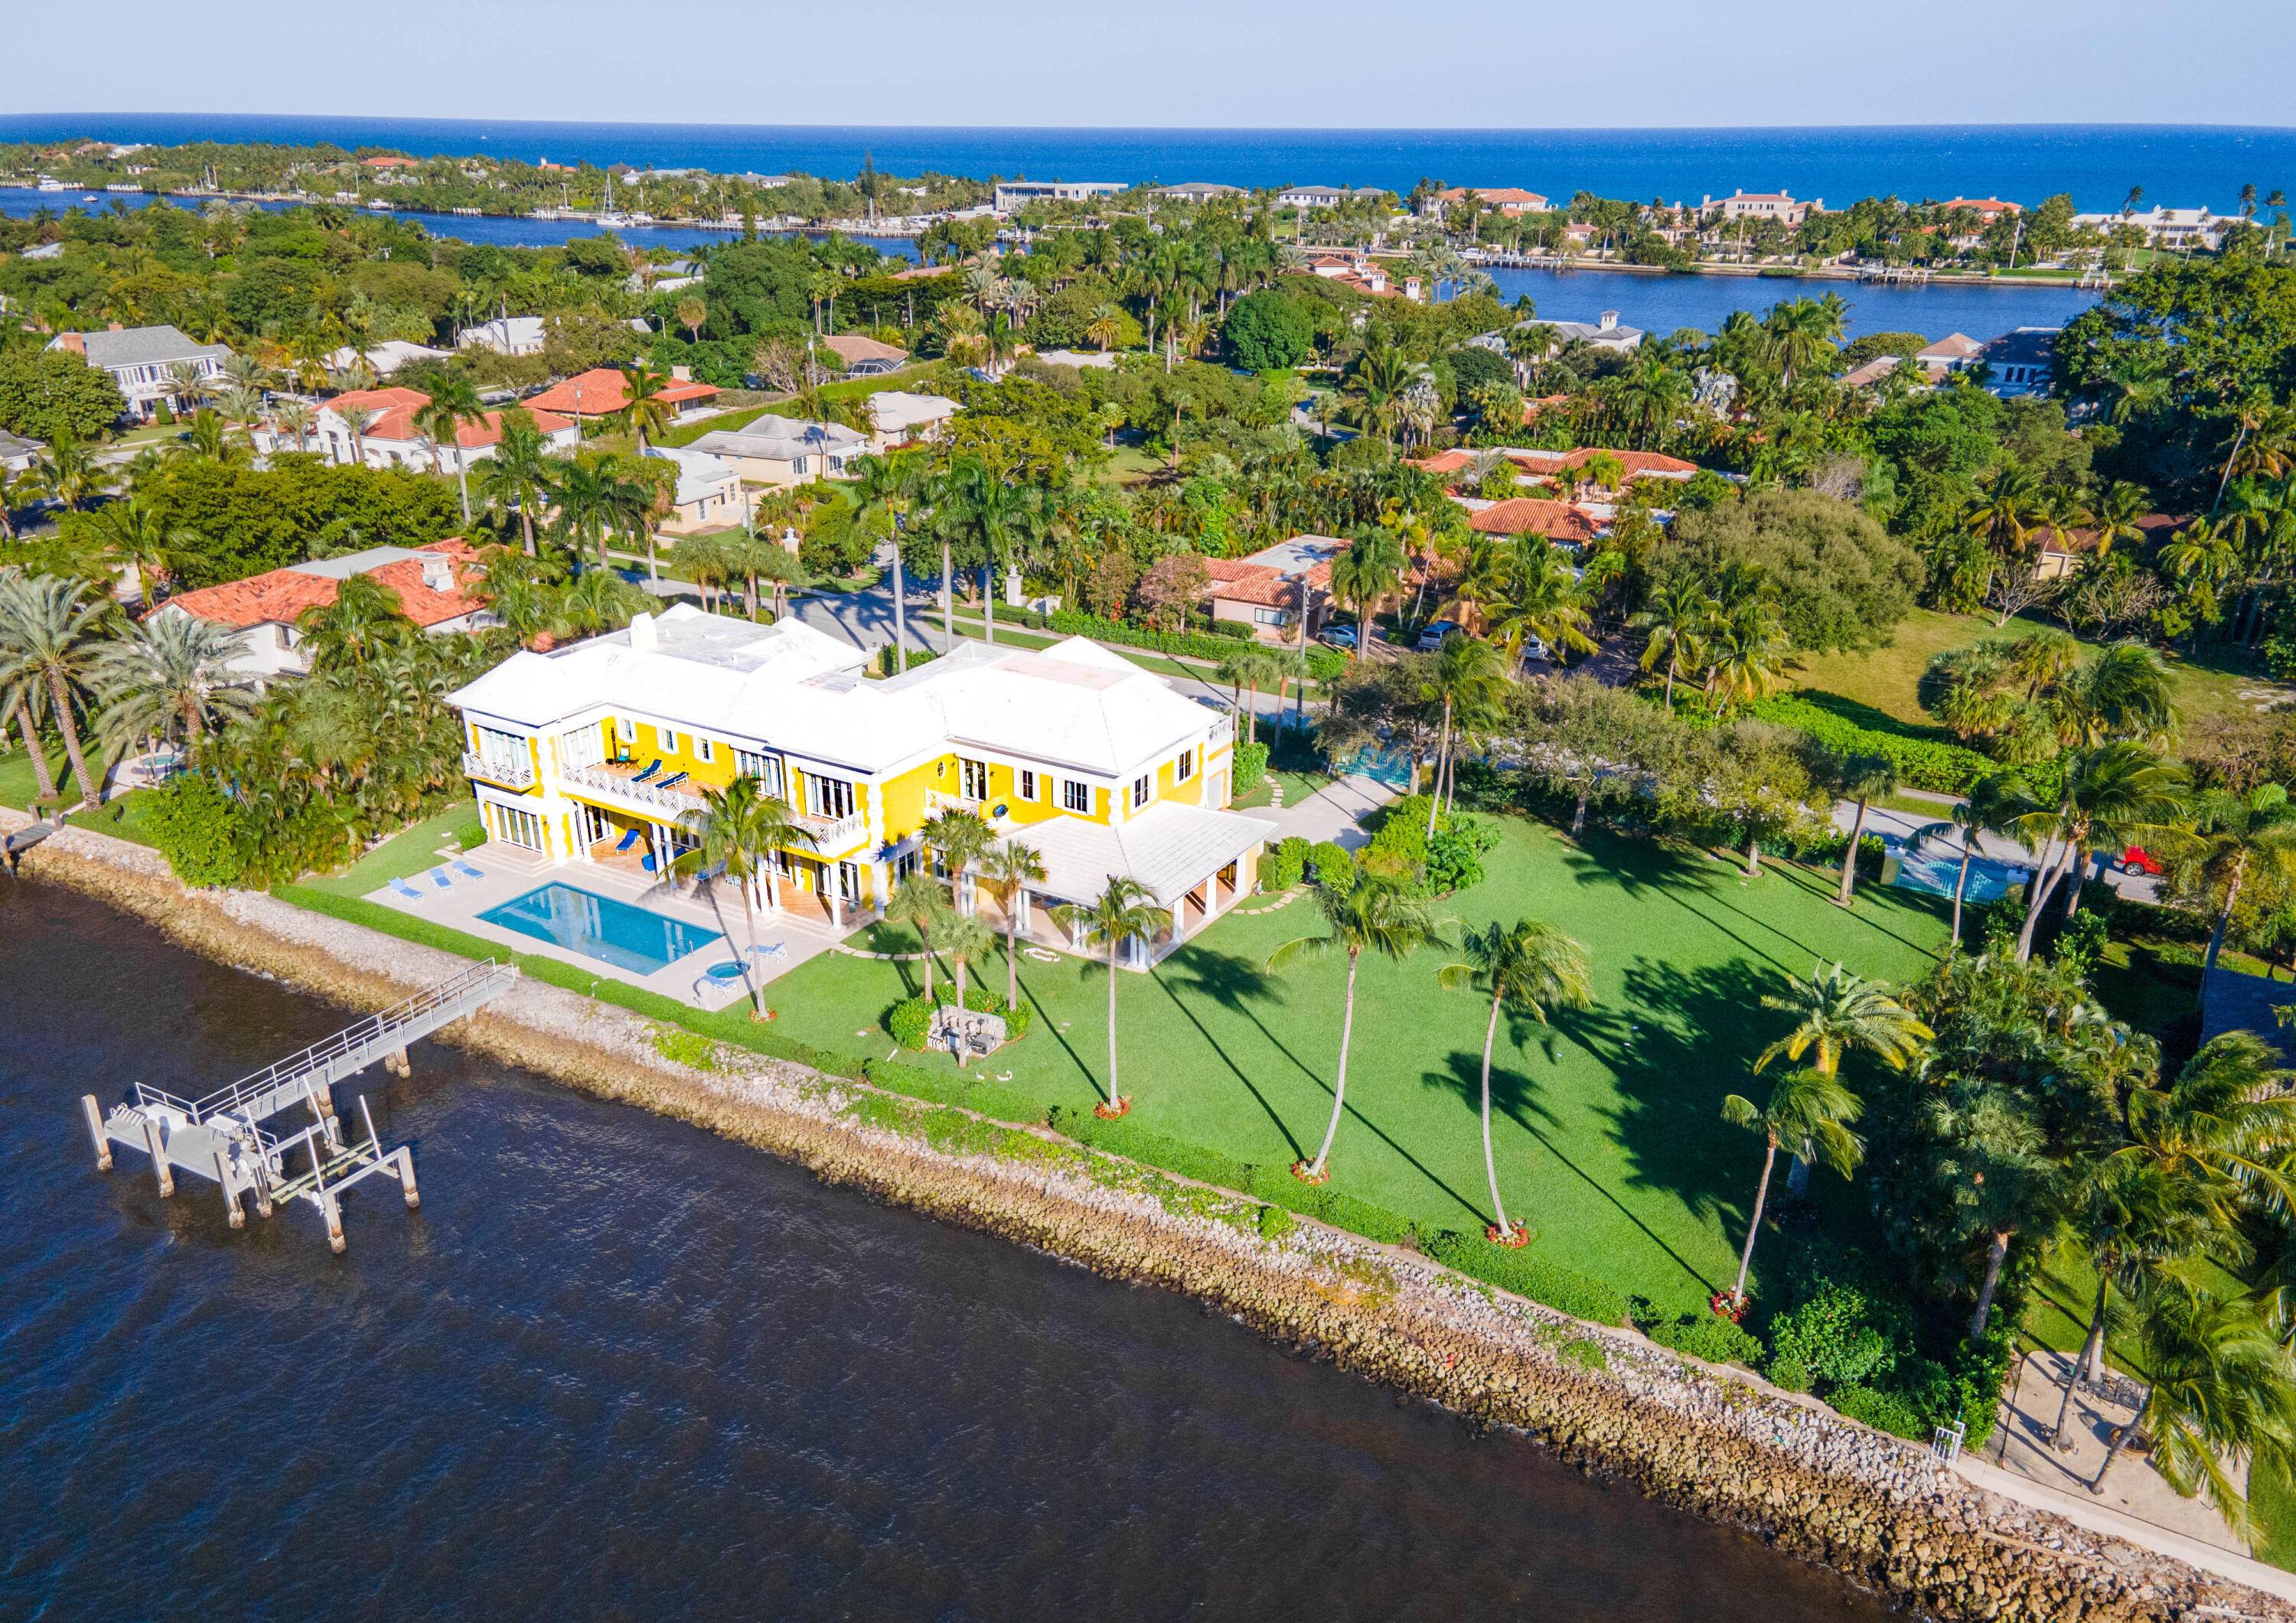 Majestic Manalapan lakefront, 12, 828 sq ft, 282 ft of deep water frontage providing dockage for a super yacht situated on 1.